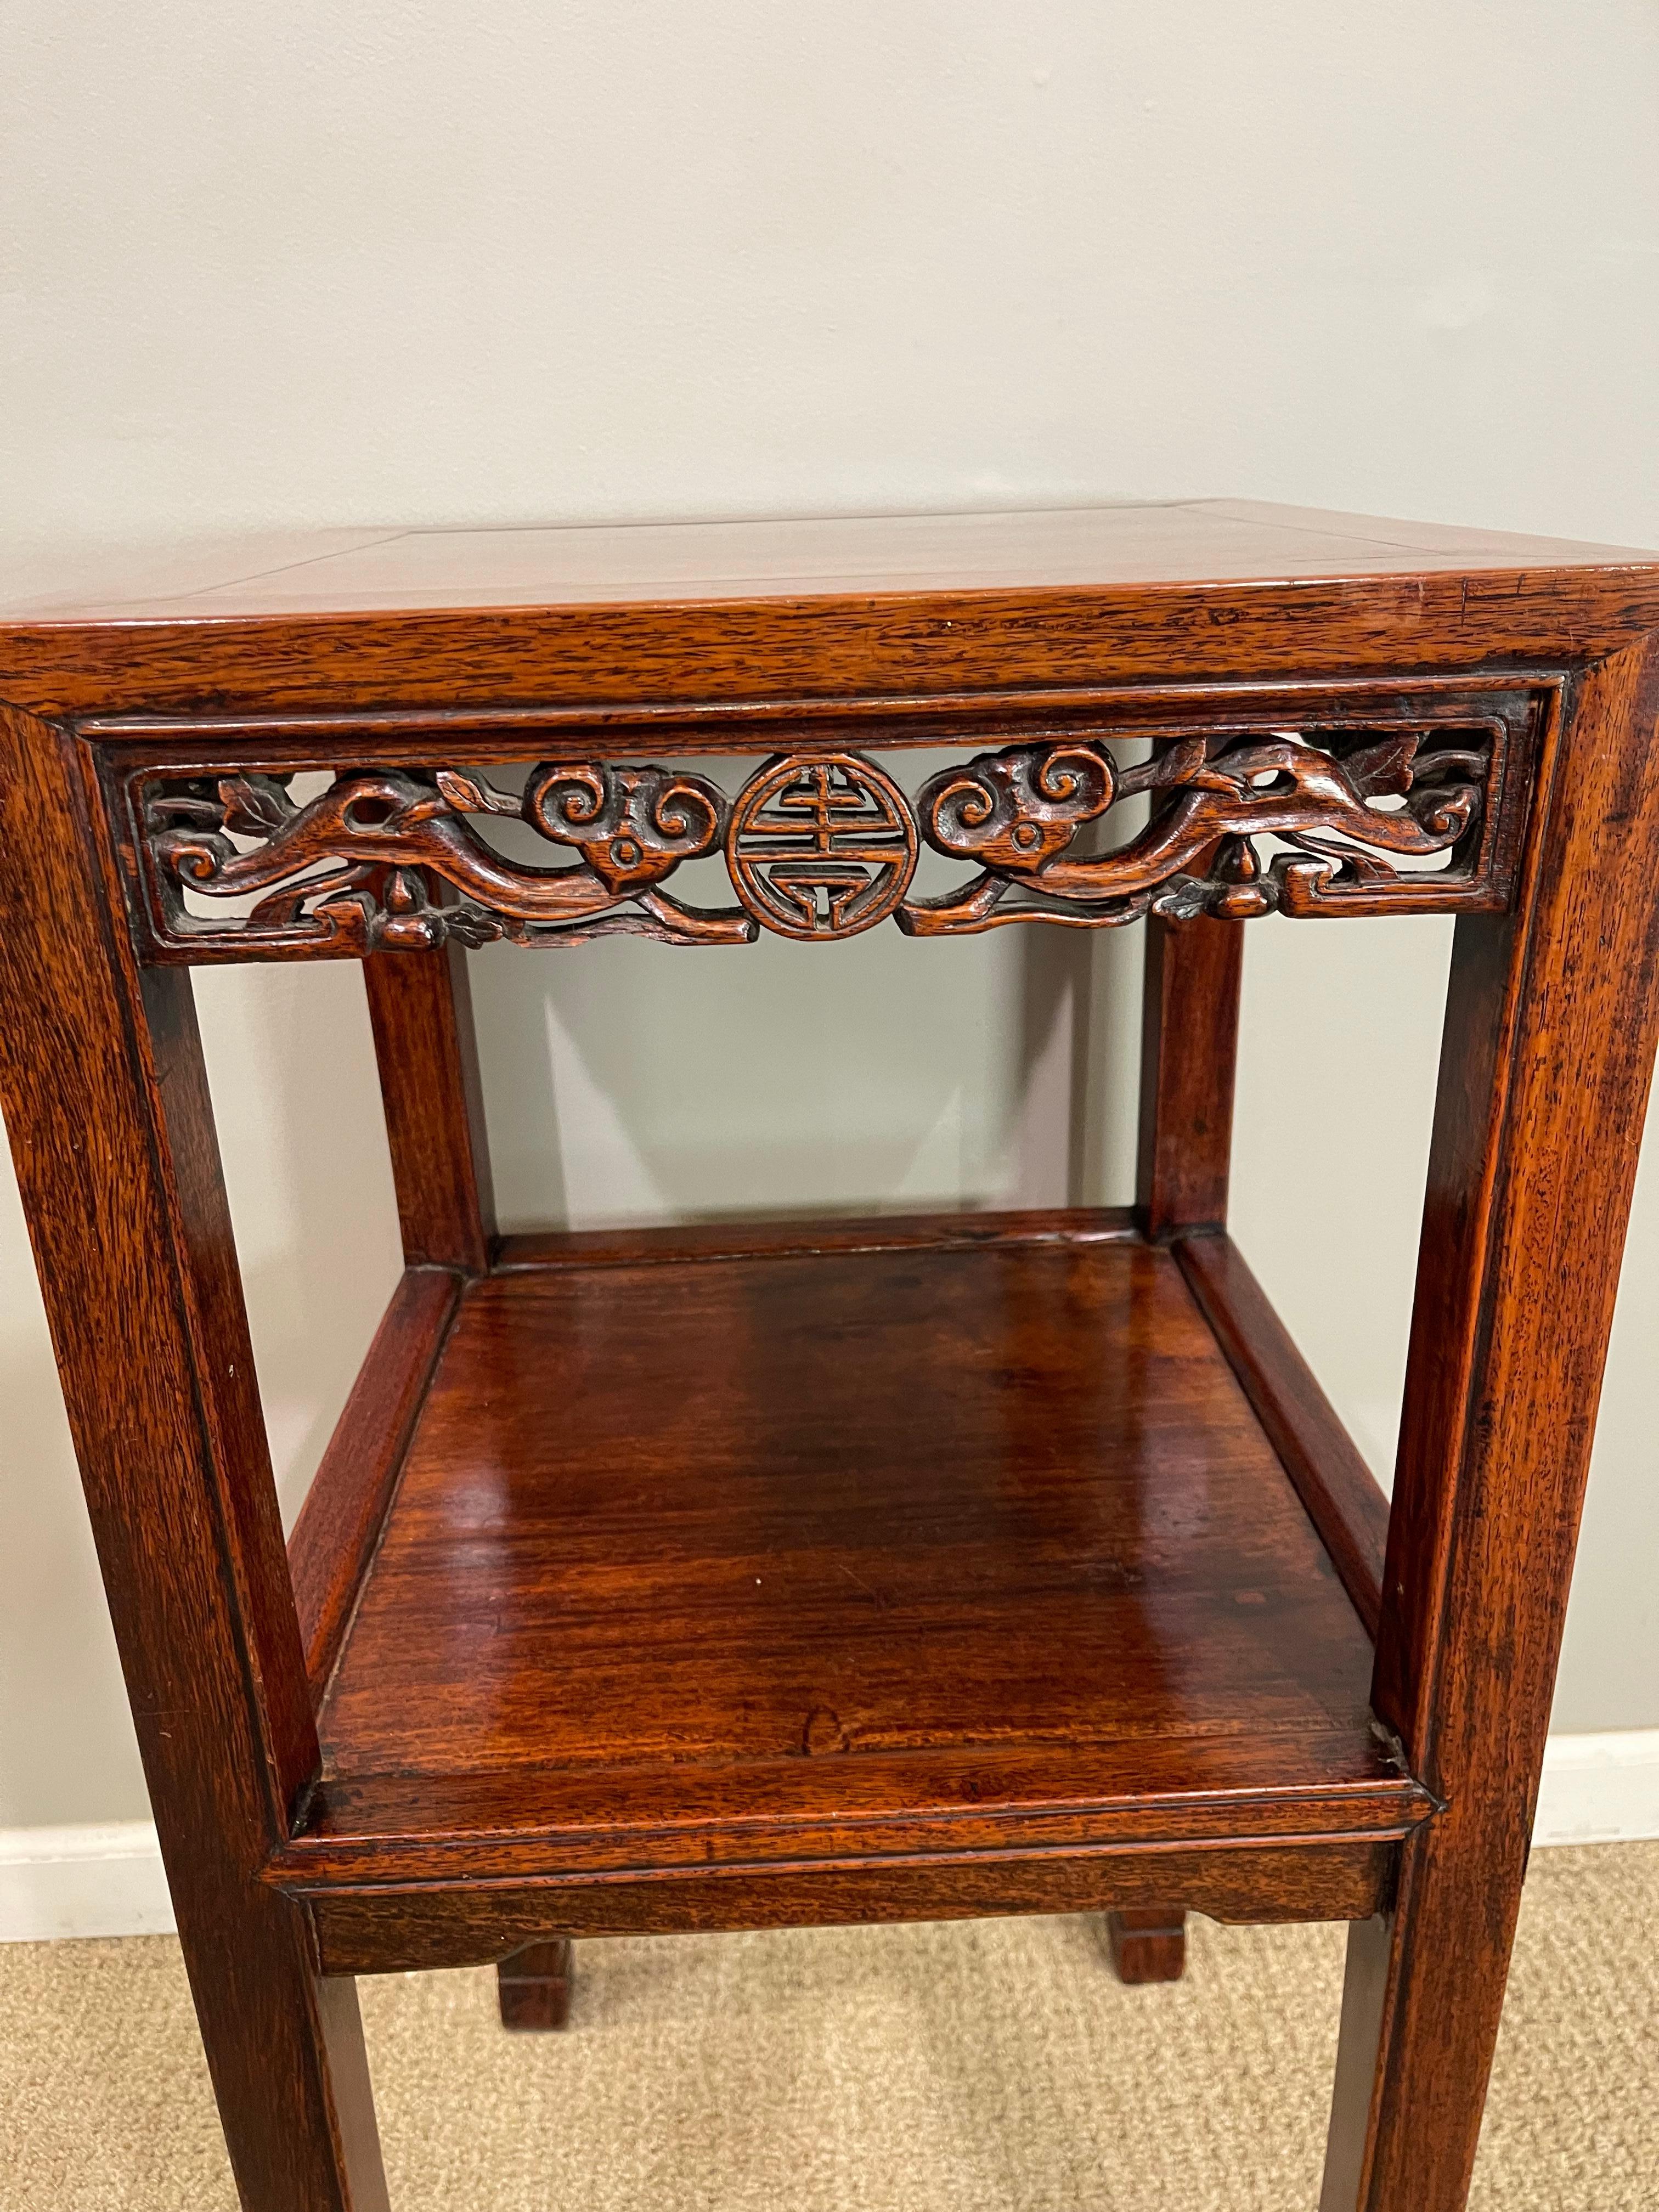 Chinese Hardwood 'Hungmu' Tea Table, Late 19th Century / Early 20th Century For Sale 3